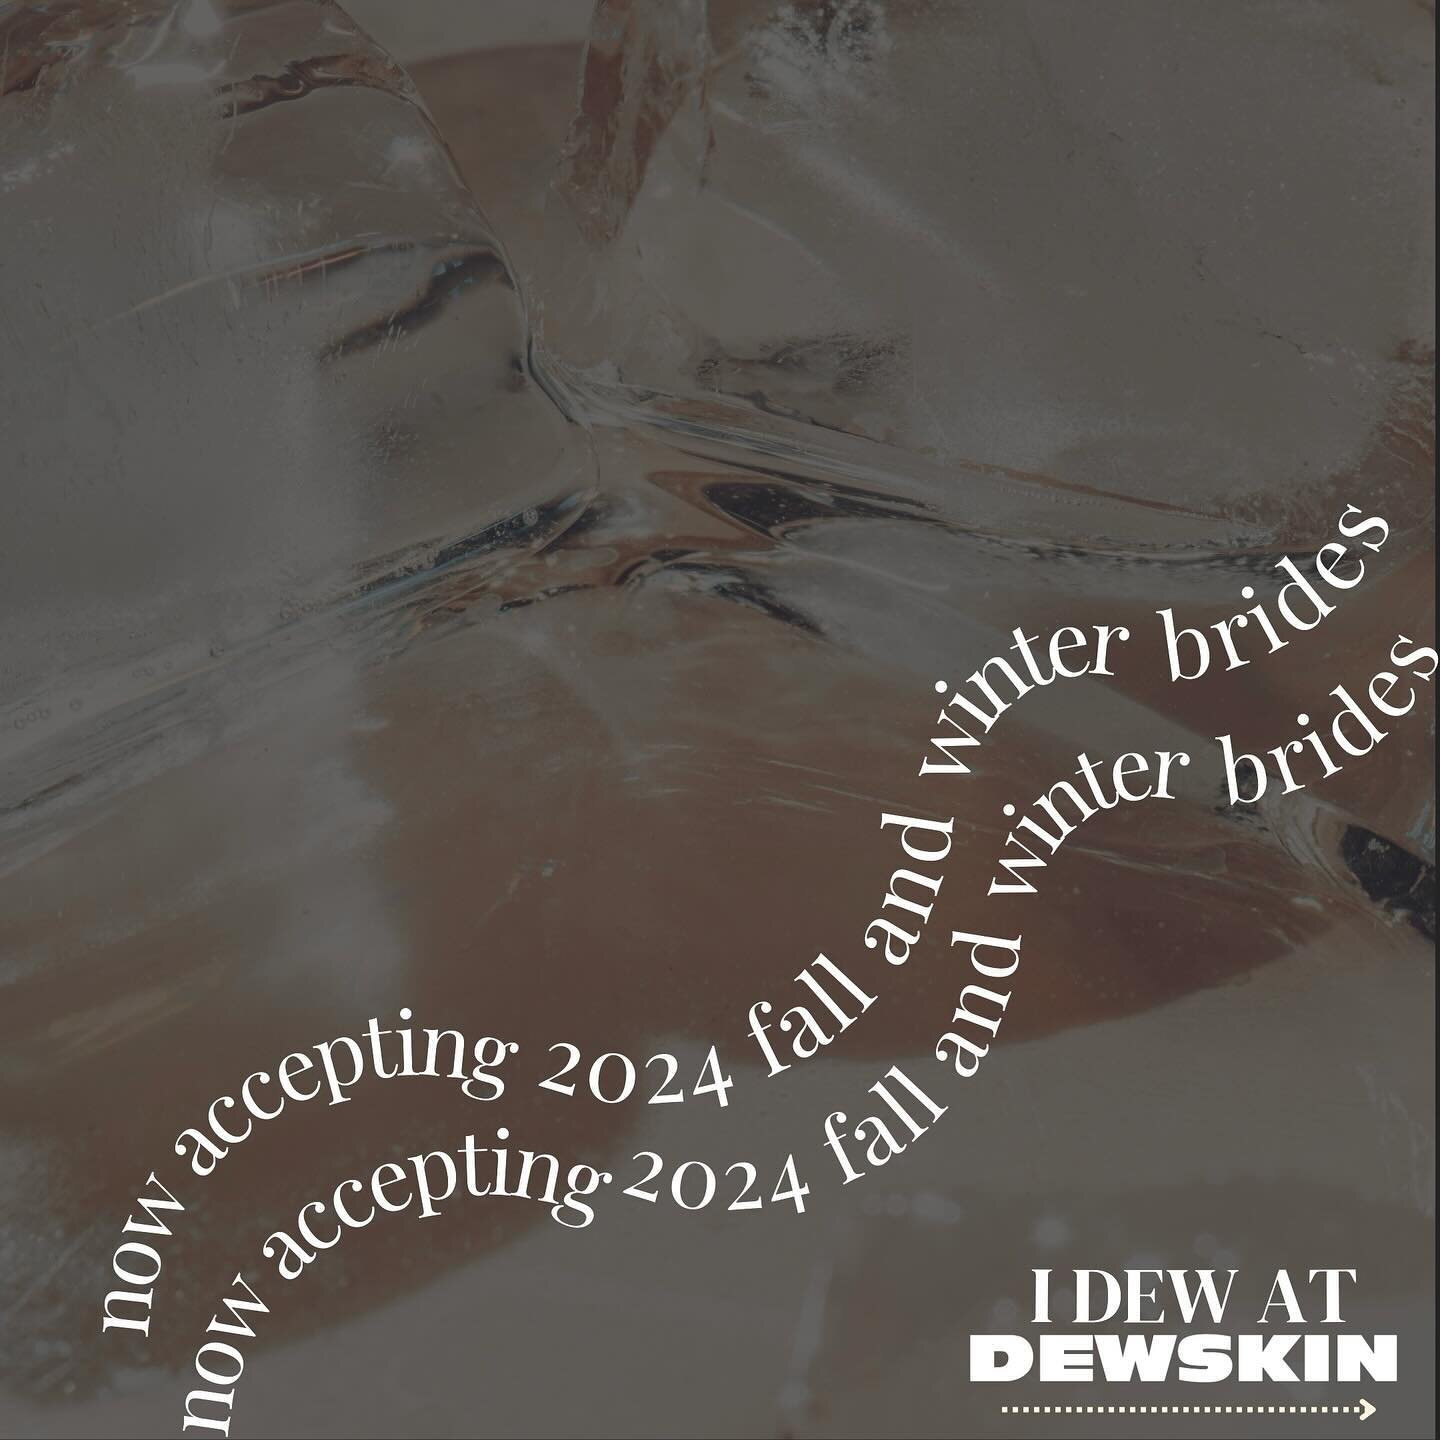 HELLO 2024 FALL &amp; WINTER BRIDES-TO-BE!💍

Get your skin wedding-ready with the &ldquo;I DEW&rdquo; bridal skincare package at Dewskin! Leave it to Leah, your Skin BFF, to create a fully customized treatment plan specific to your skin&rsquo;s need